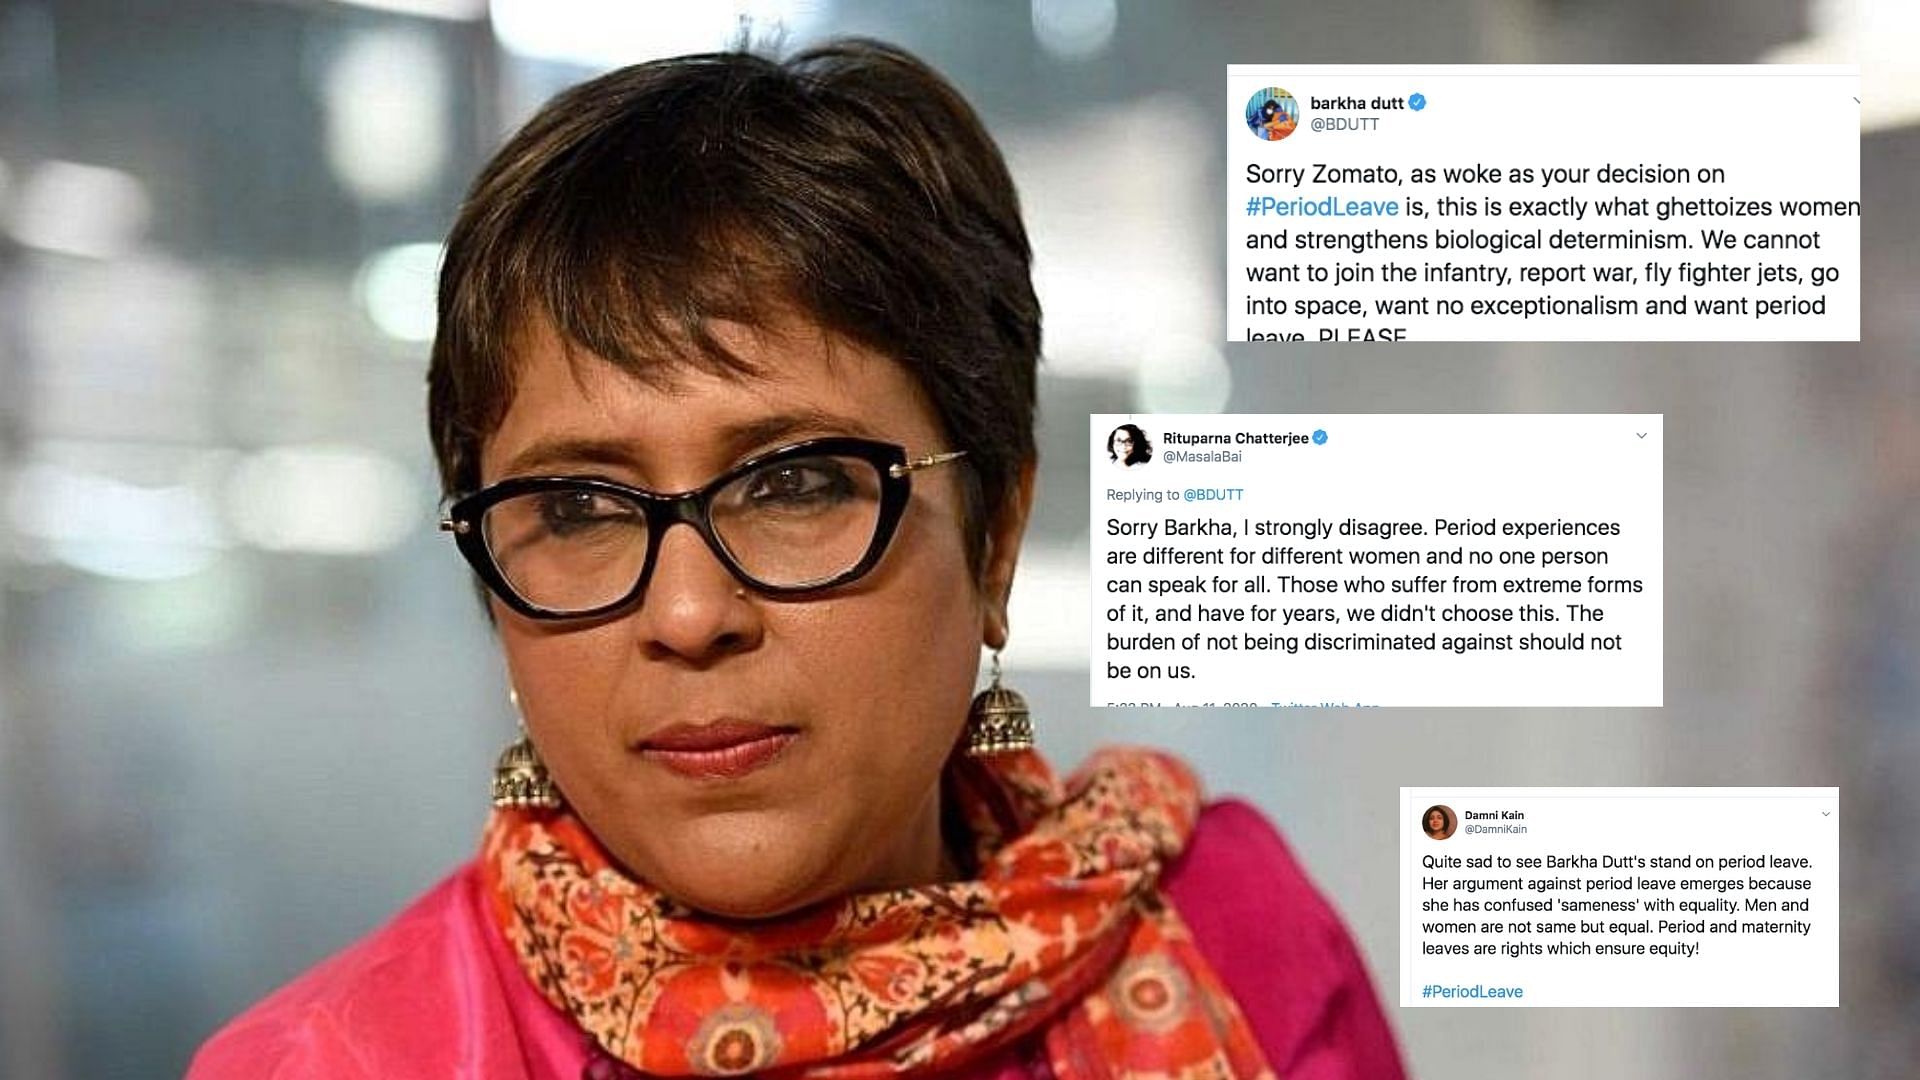 Twitter objects to Barkha Dutt's remarks on period leaves. 